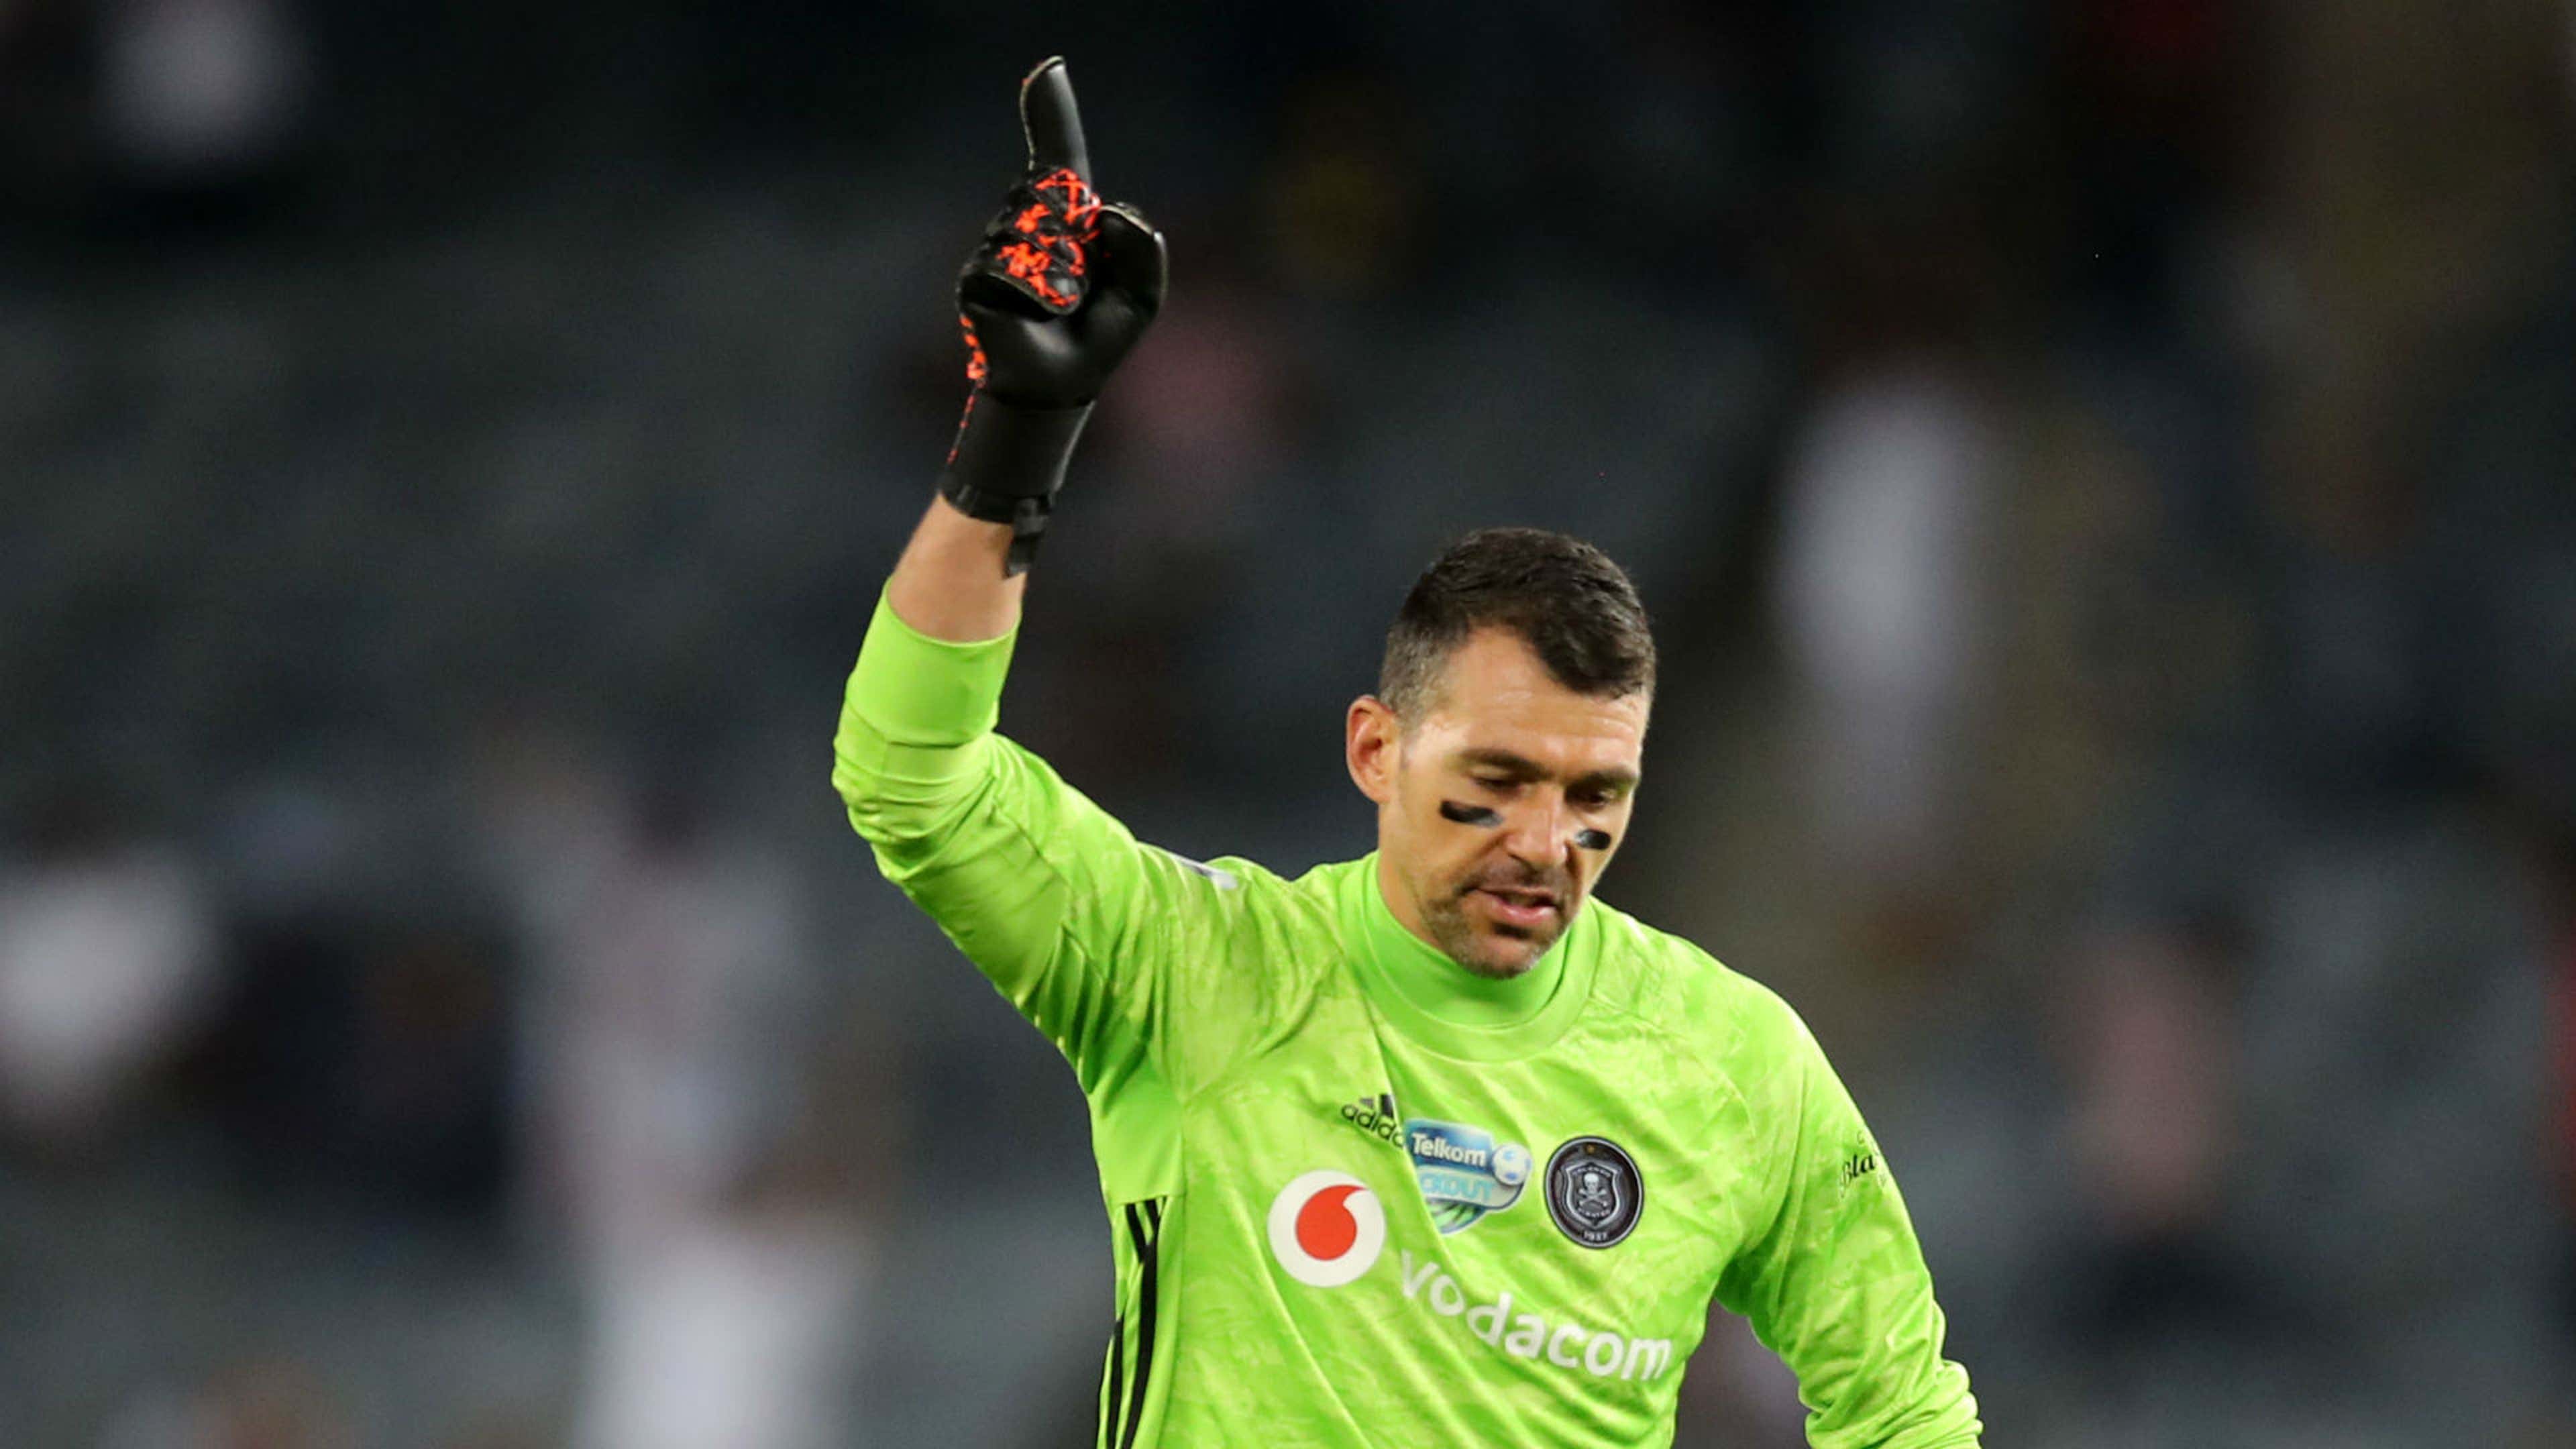 Has Sandilands just raised his hand for new Orlando Pirates deal?